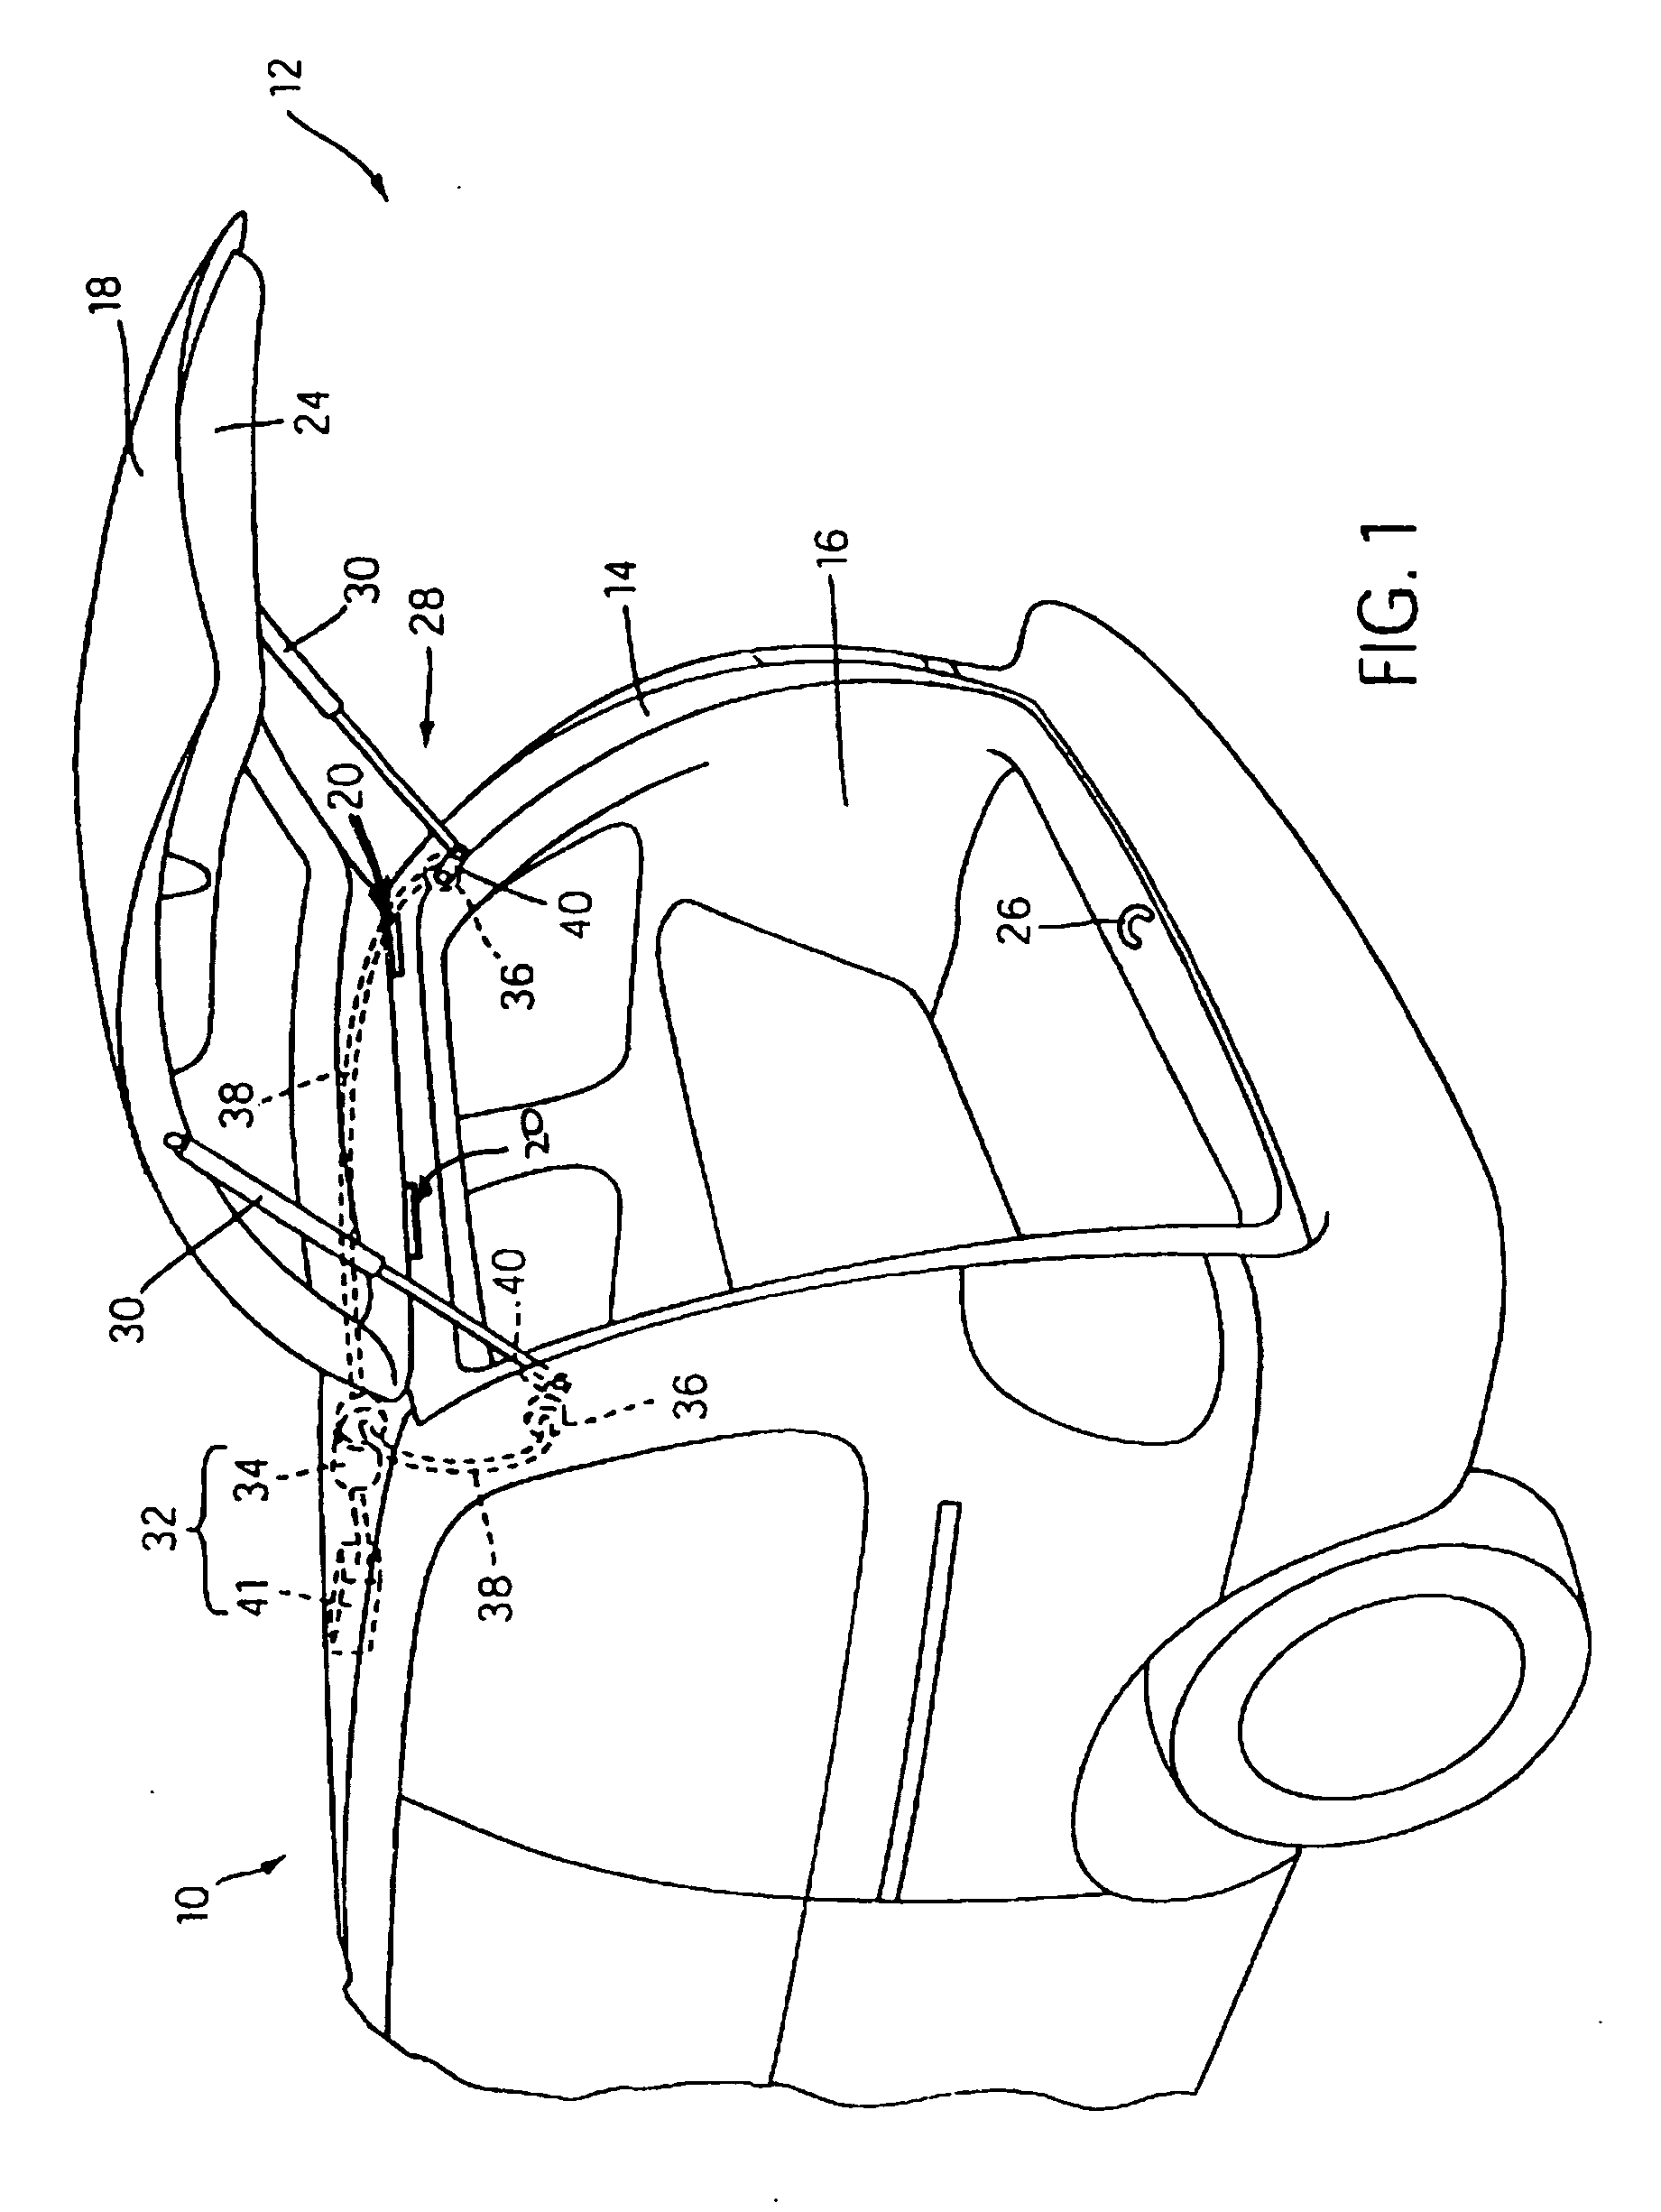 Low-mounted powered opening system and control mechanism